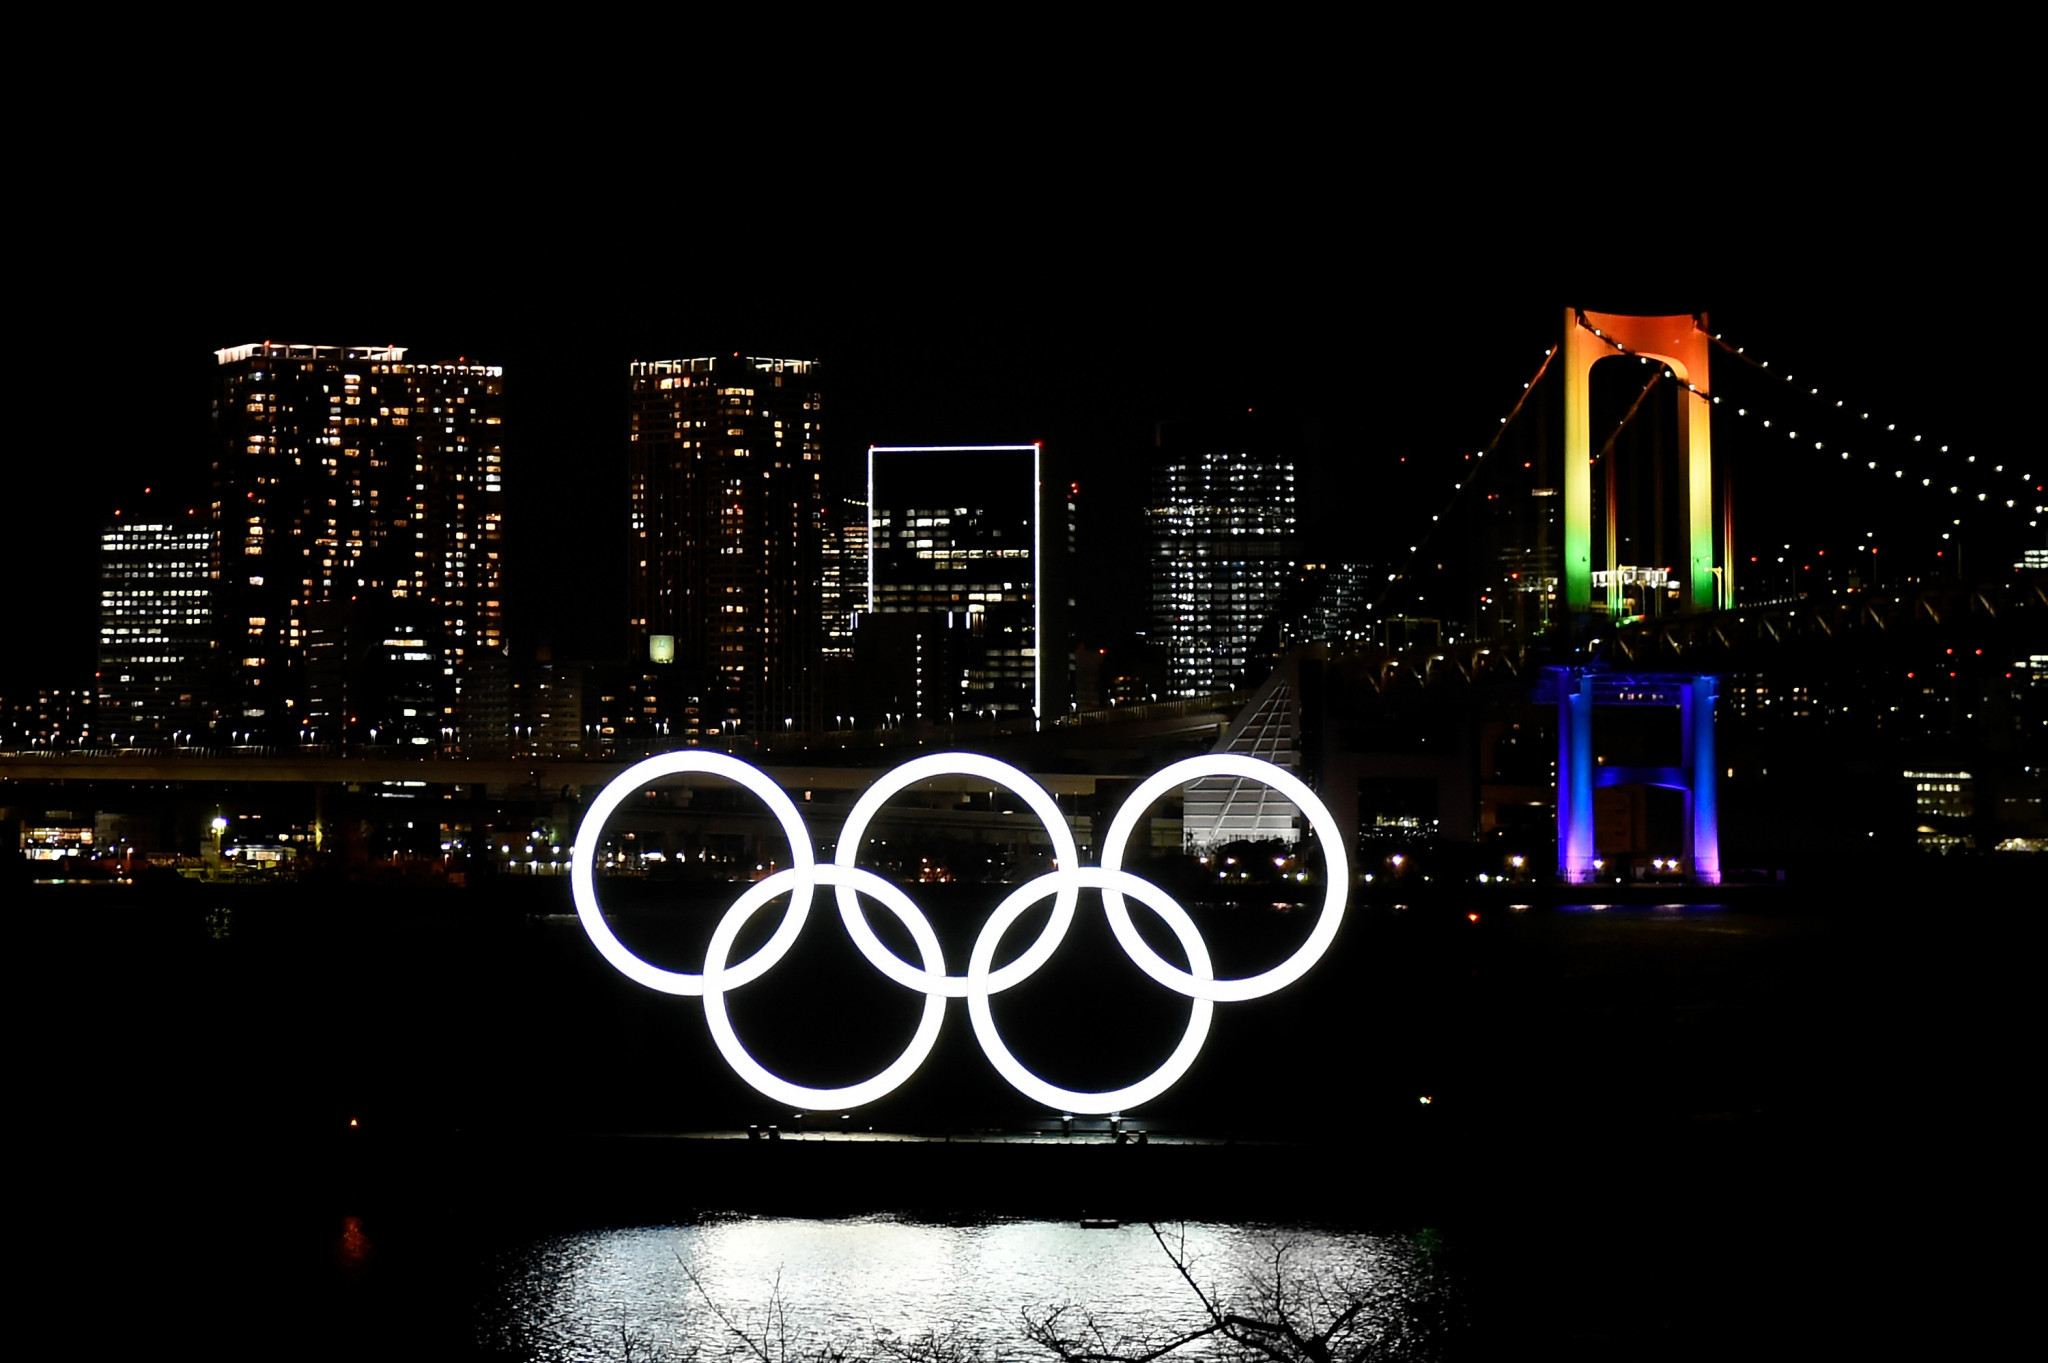 Tokyo marks six months to Olympic Games with fireworks and rings monument lighting